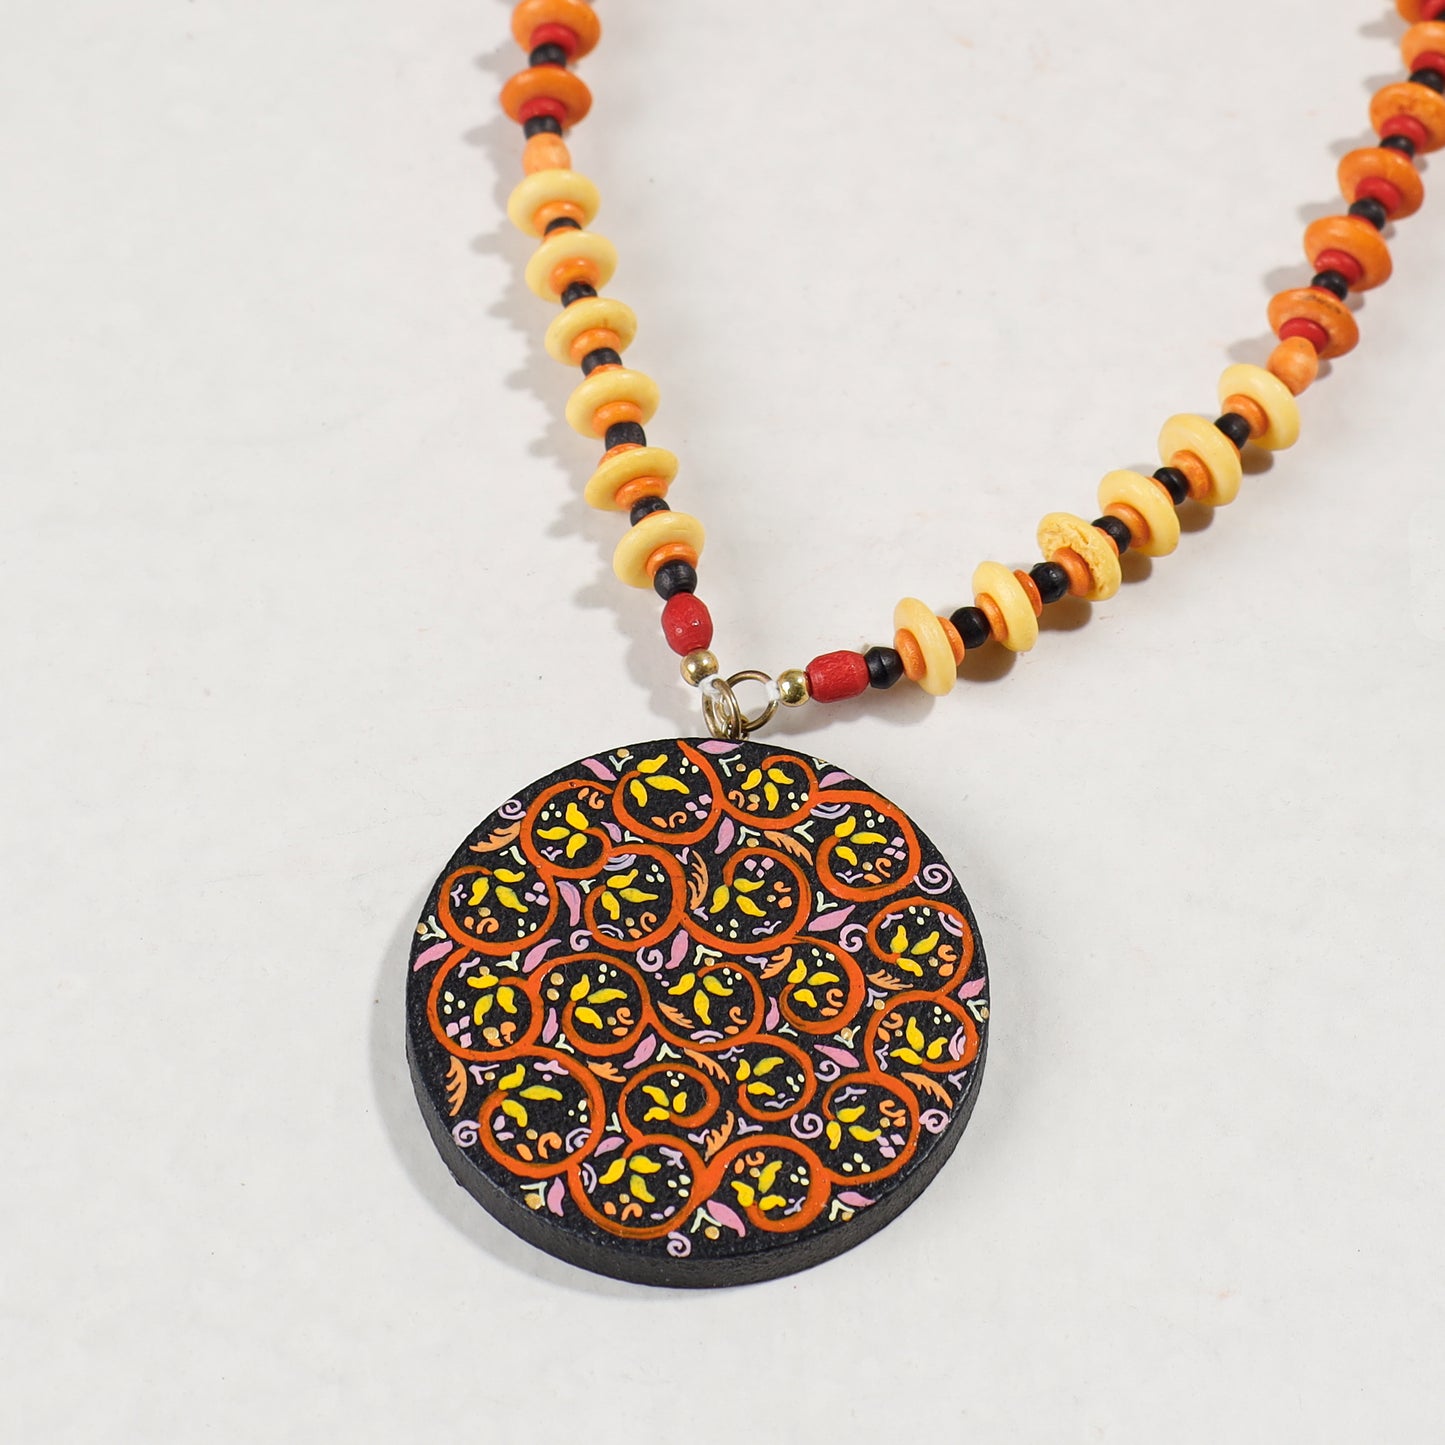 Miniature Handpainted Wooden Necklace Set With Beads